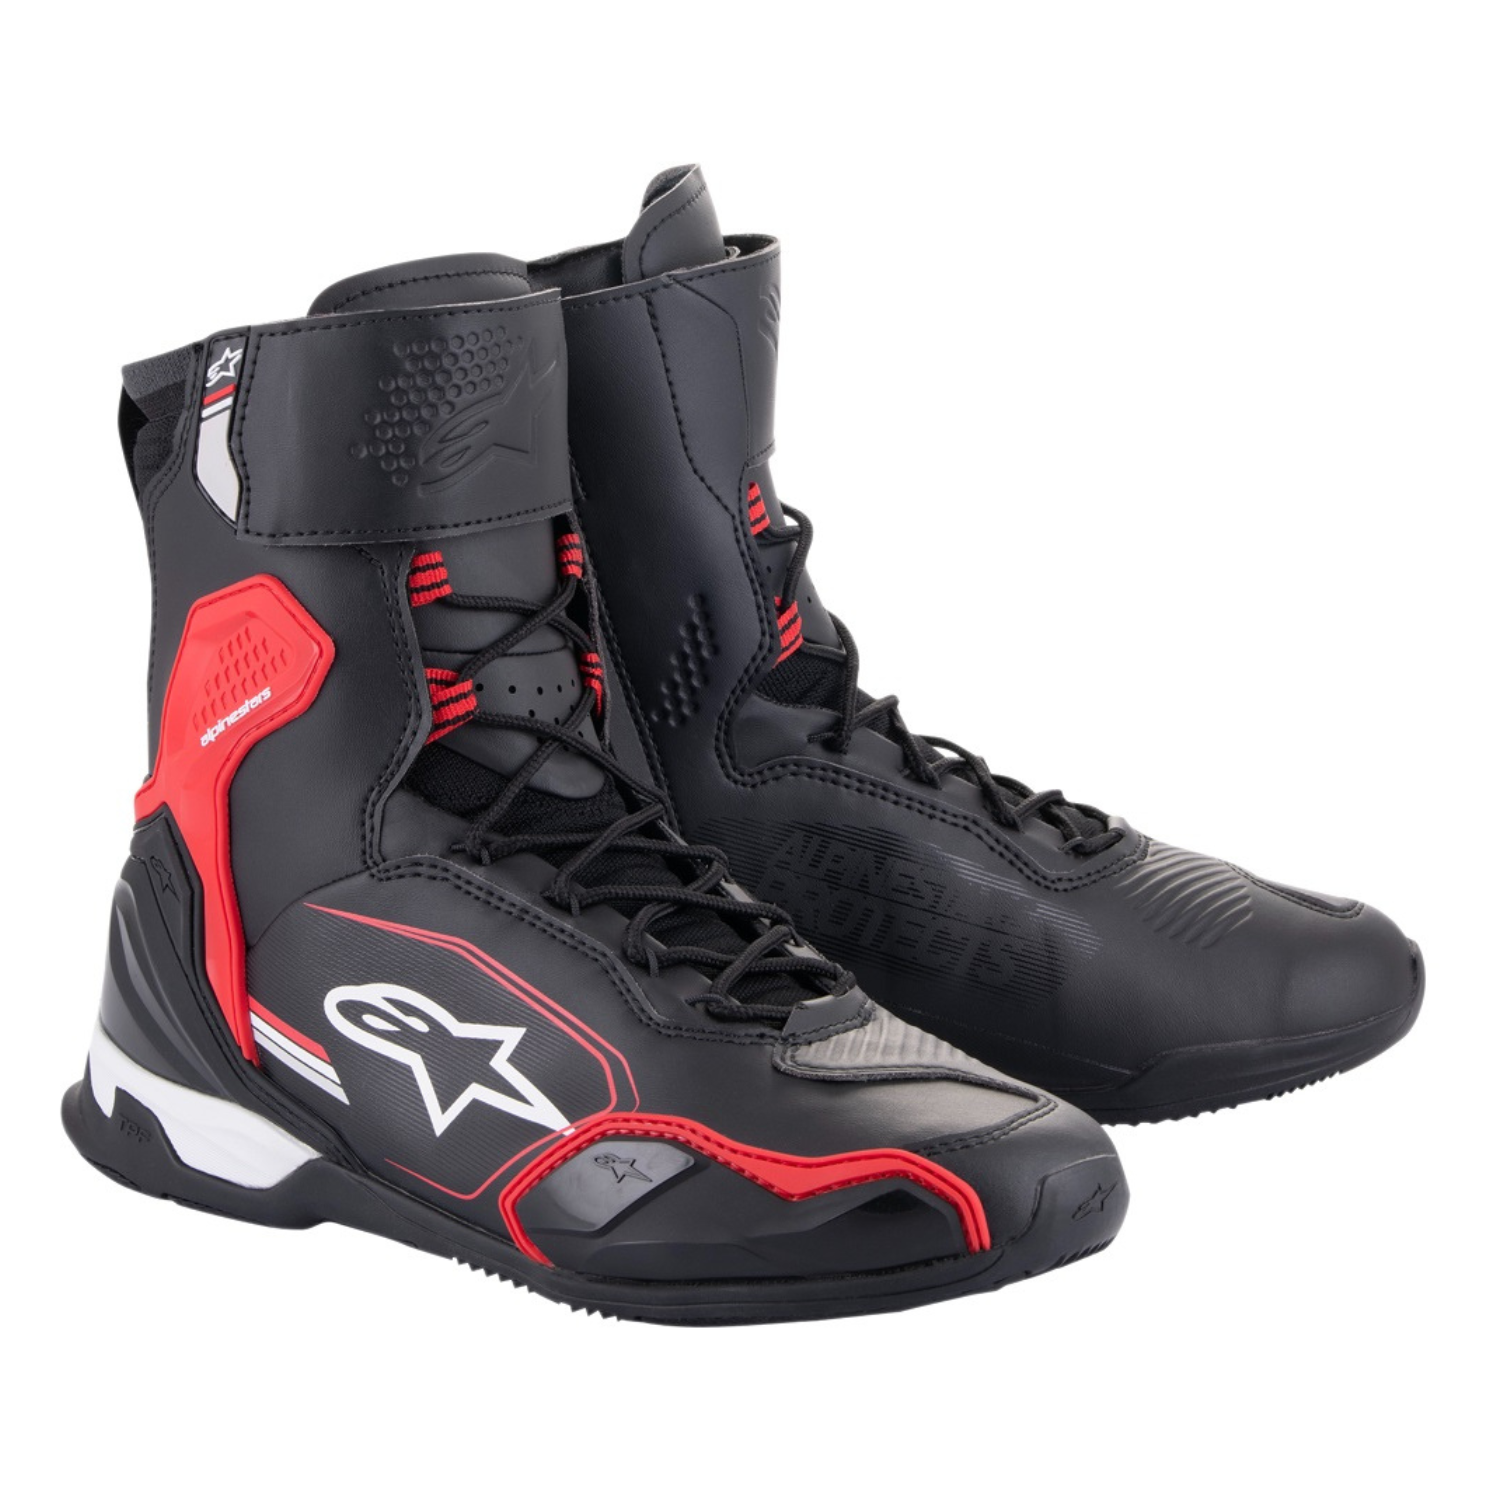 Image of Alpinestars Superfaster Shoes Black Bright Red White Size US 105 EN